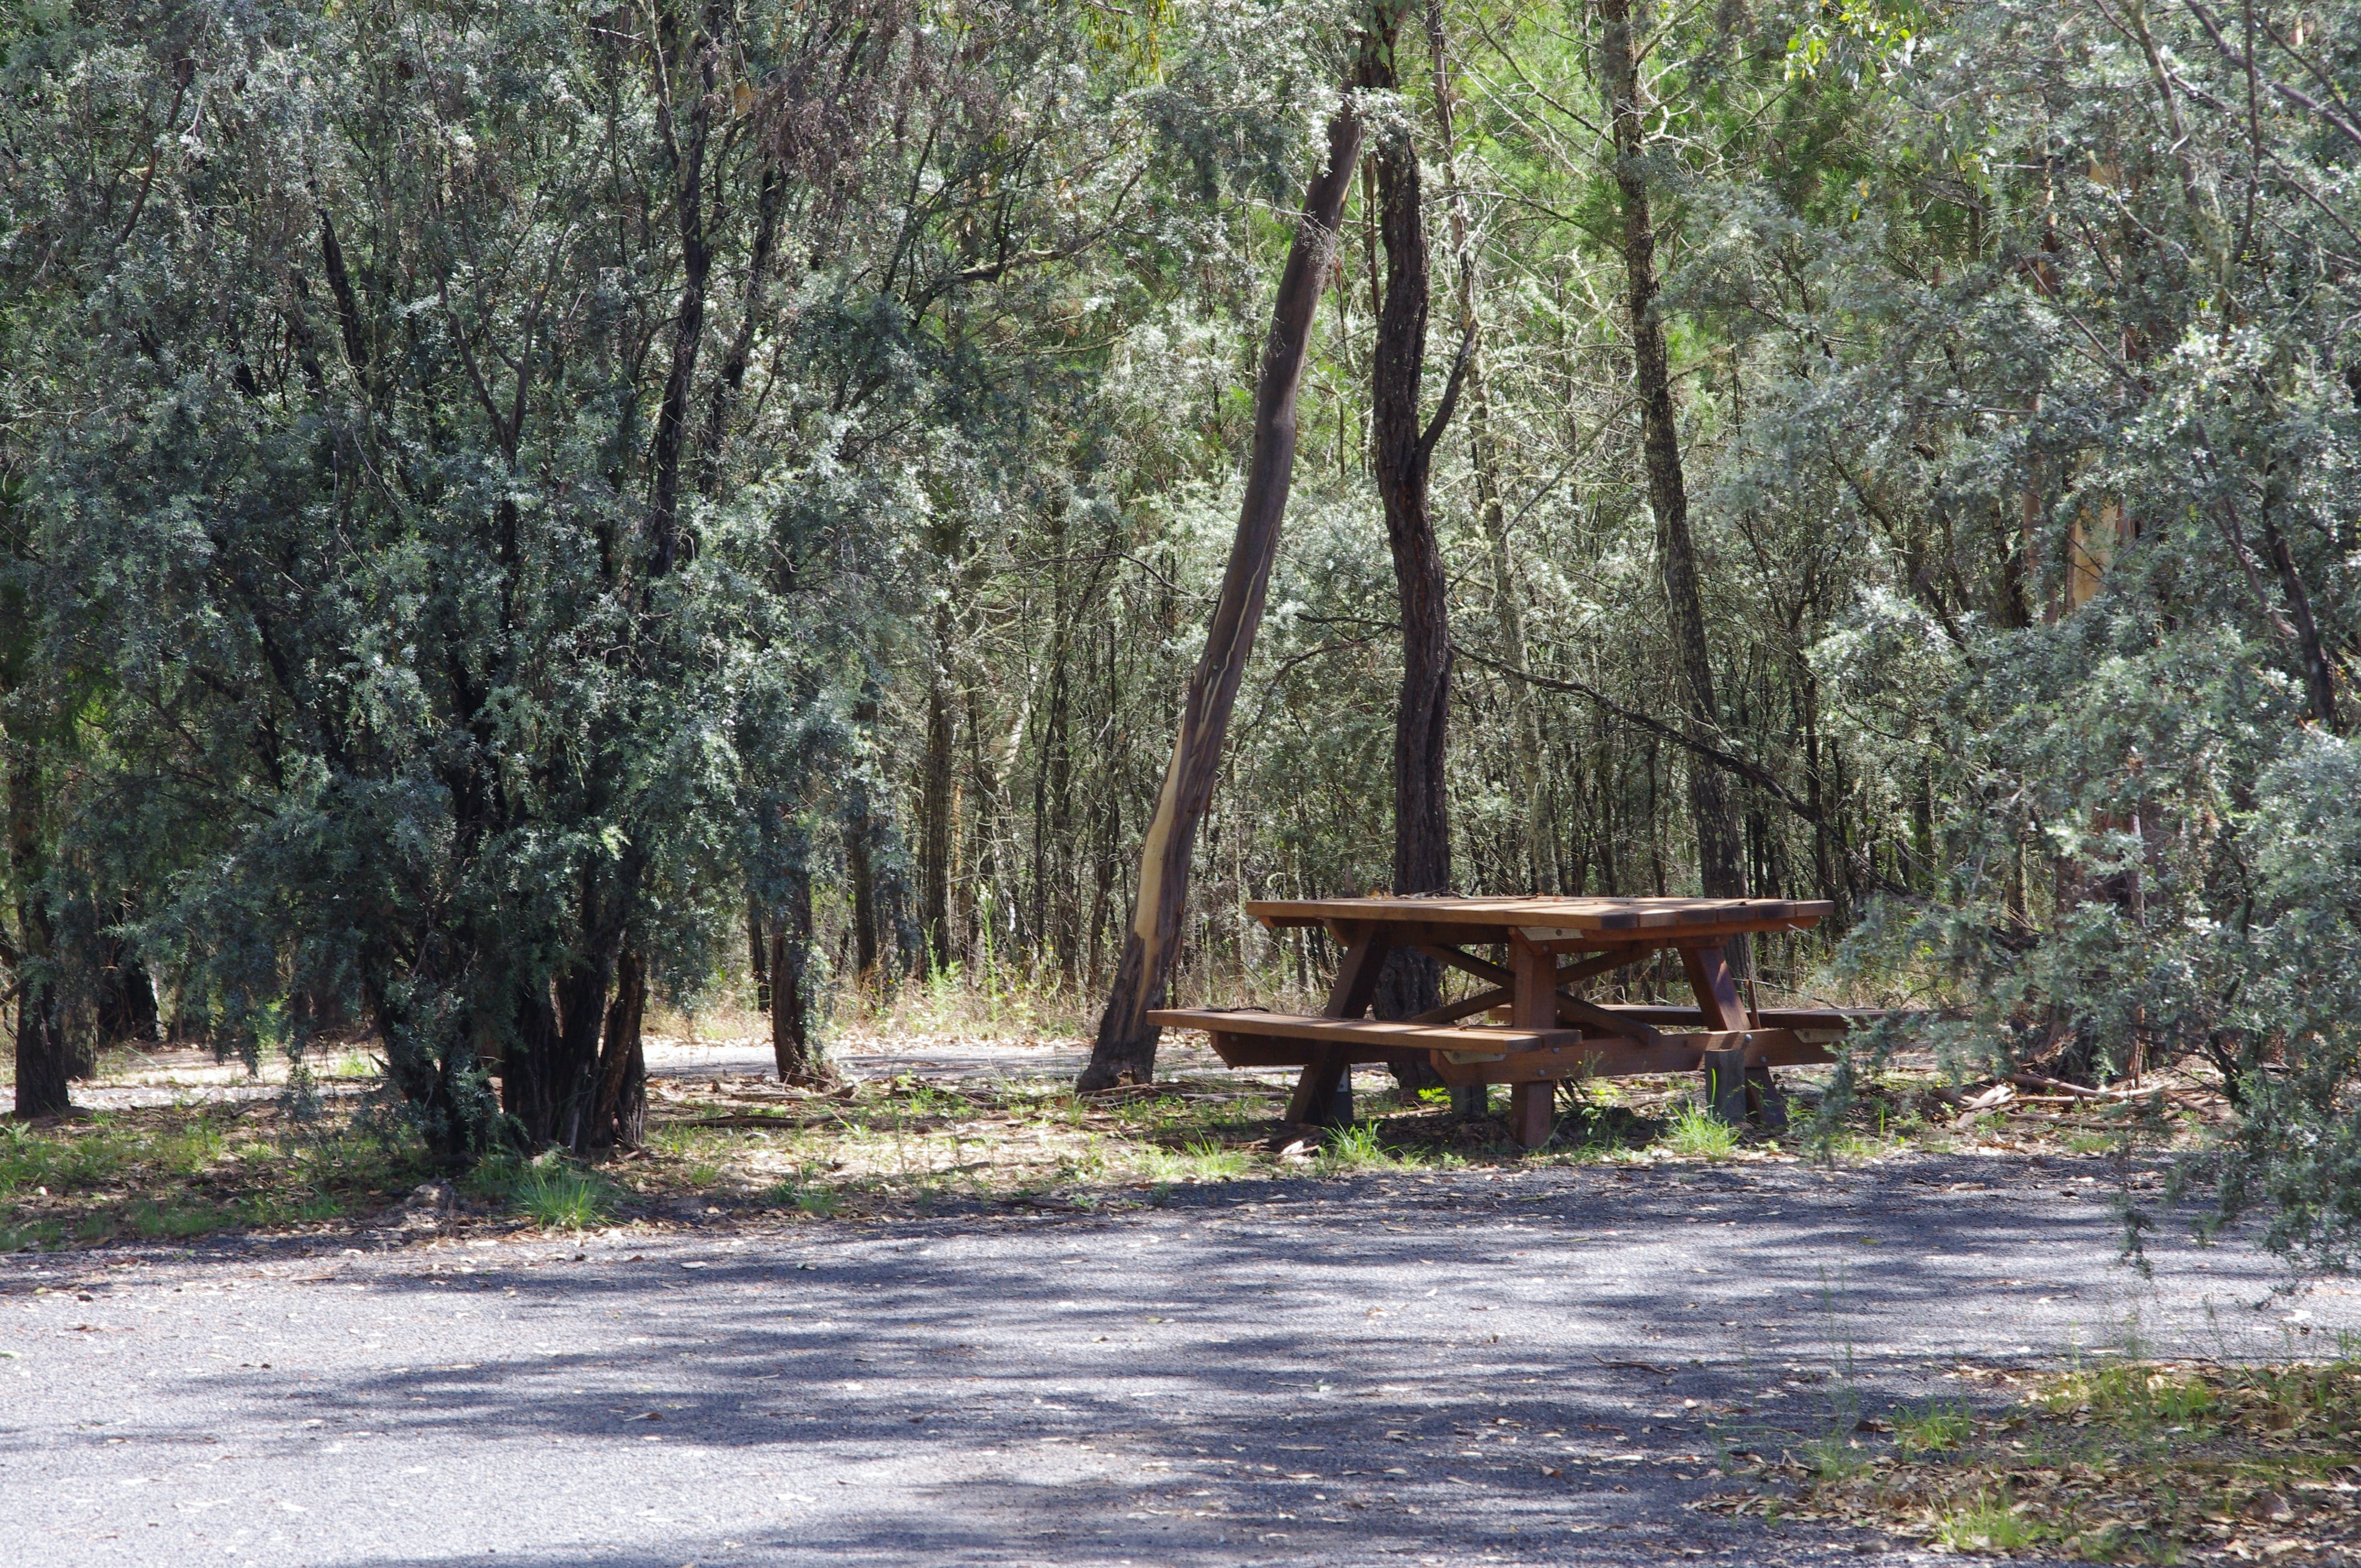 Goonoowigall State Conservation Area - Geraldton Accommodation